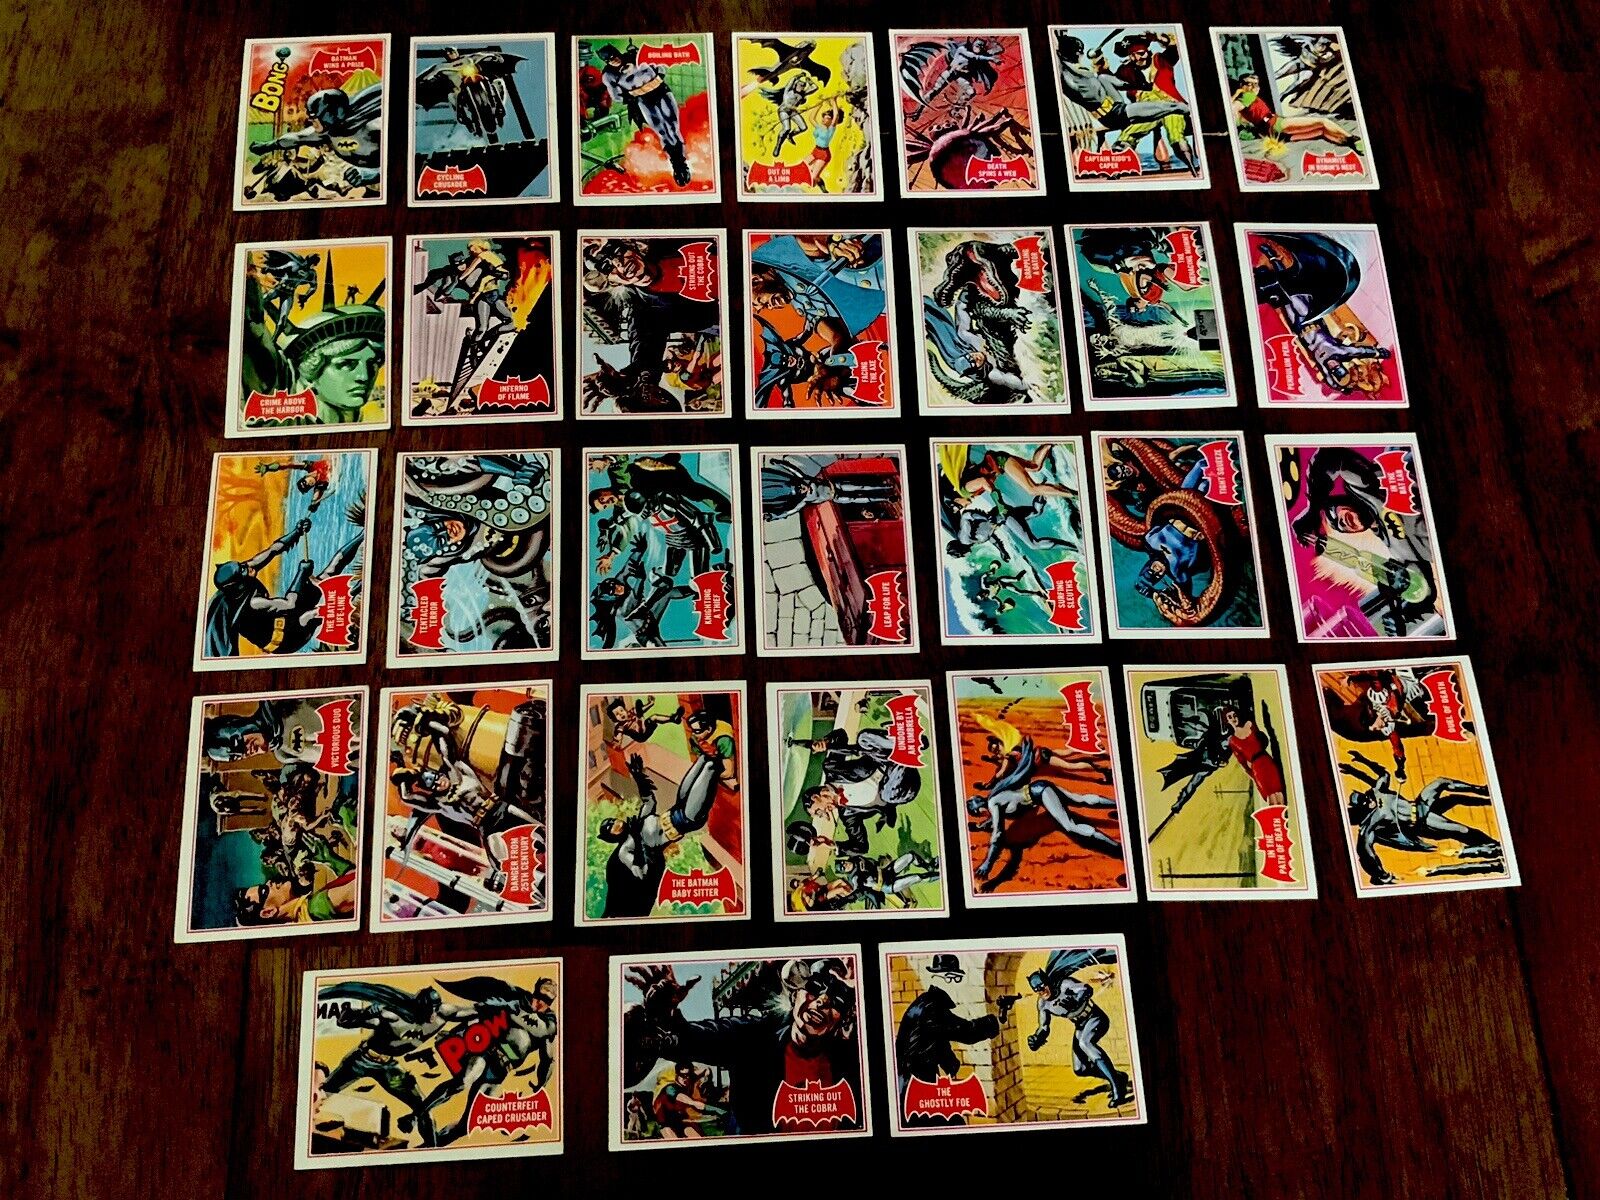 1966 Topps Batman Red Bat Card Lot Of 31 Cards - Very Nice Condition